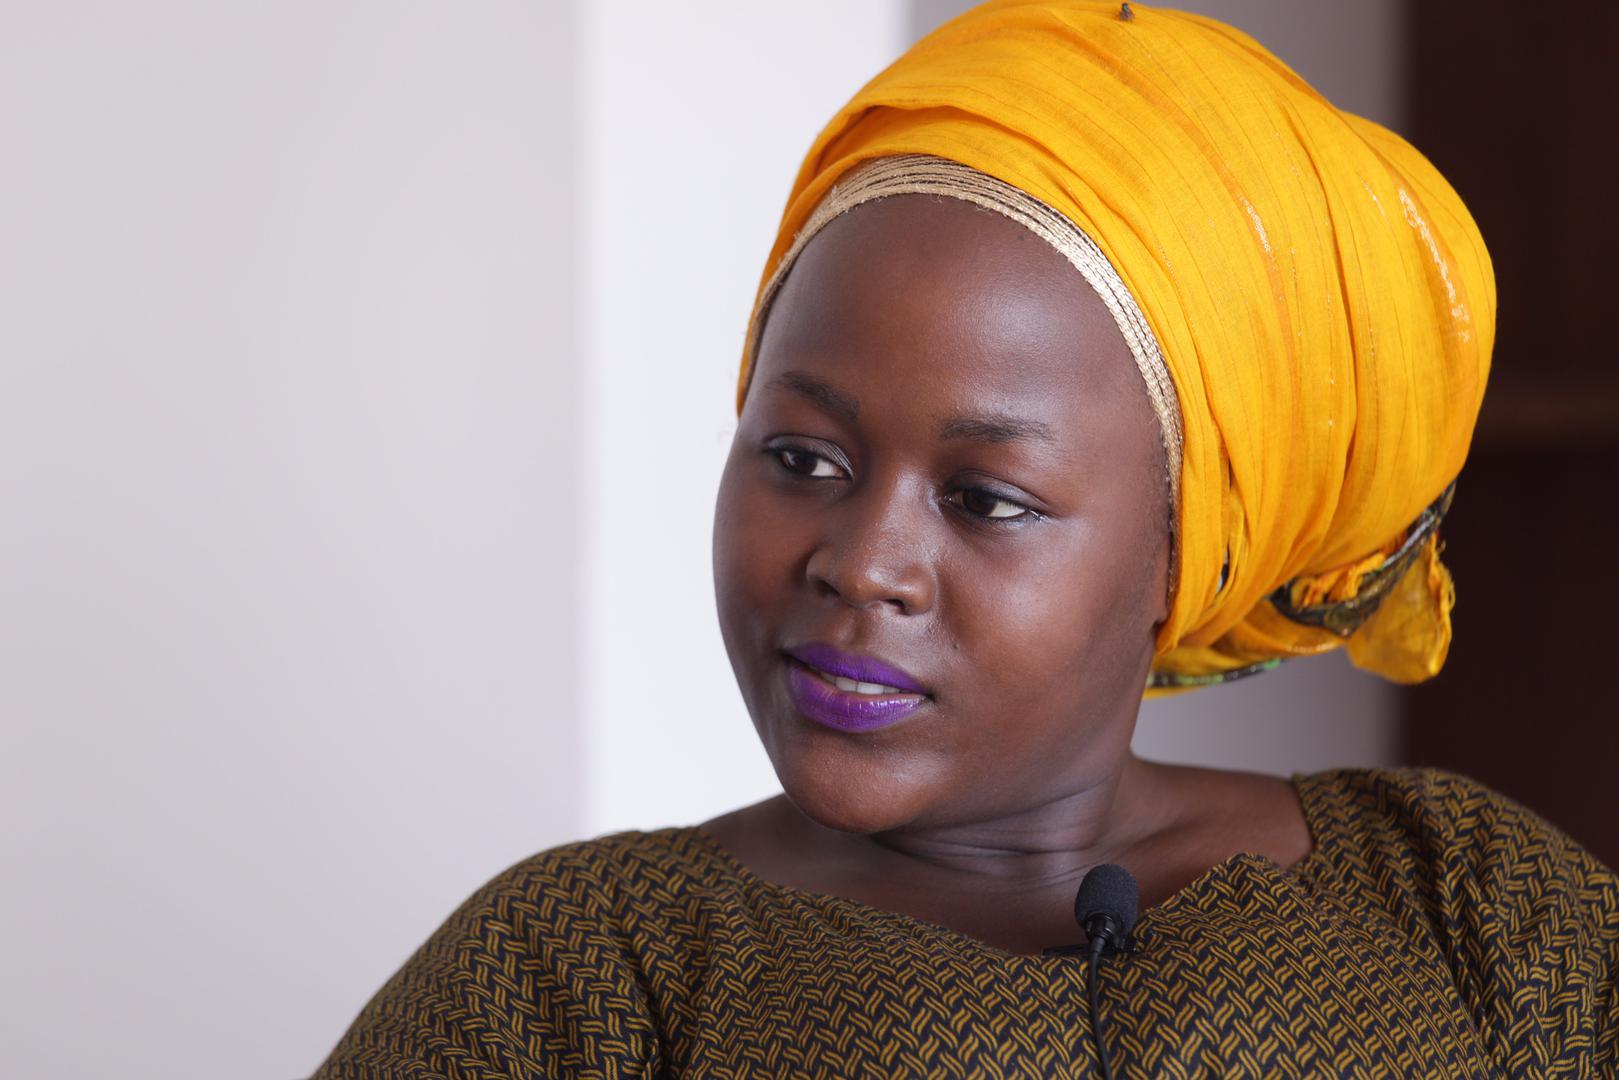 Cecilia, 22, said in Oman she worked 16 hours a day with no rest and no day off, and was paid 60 OMR instead of the 100 OMR her agent promised. She said her employer made sexual advances towards her and hit her after she refused. Dar es Salaam, Tanzania.